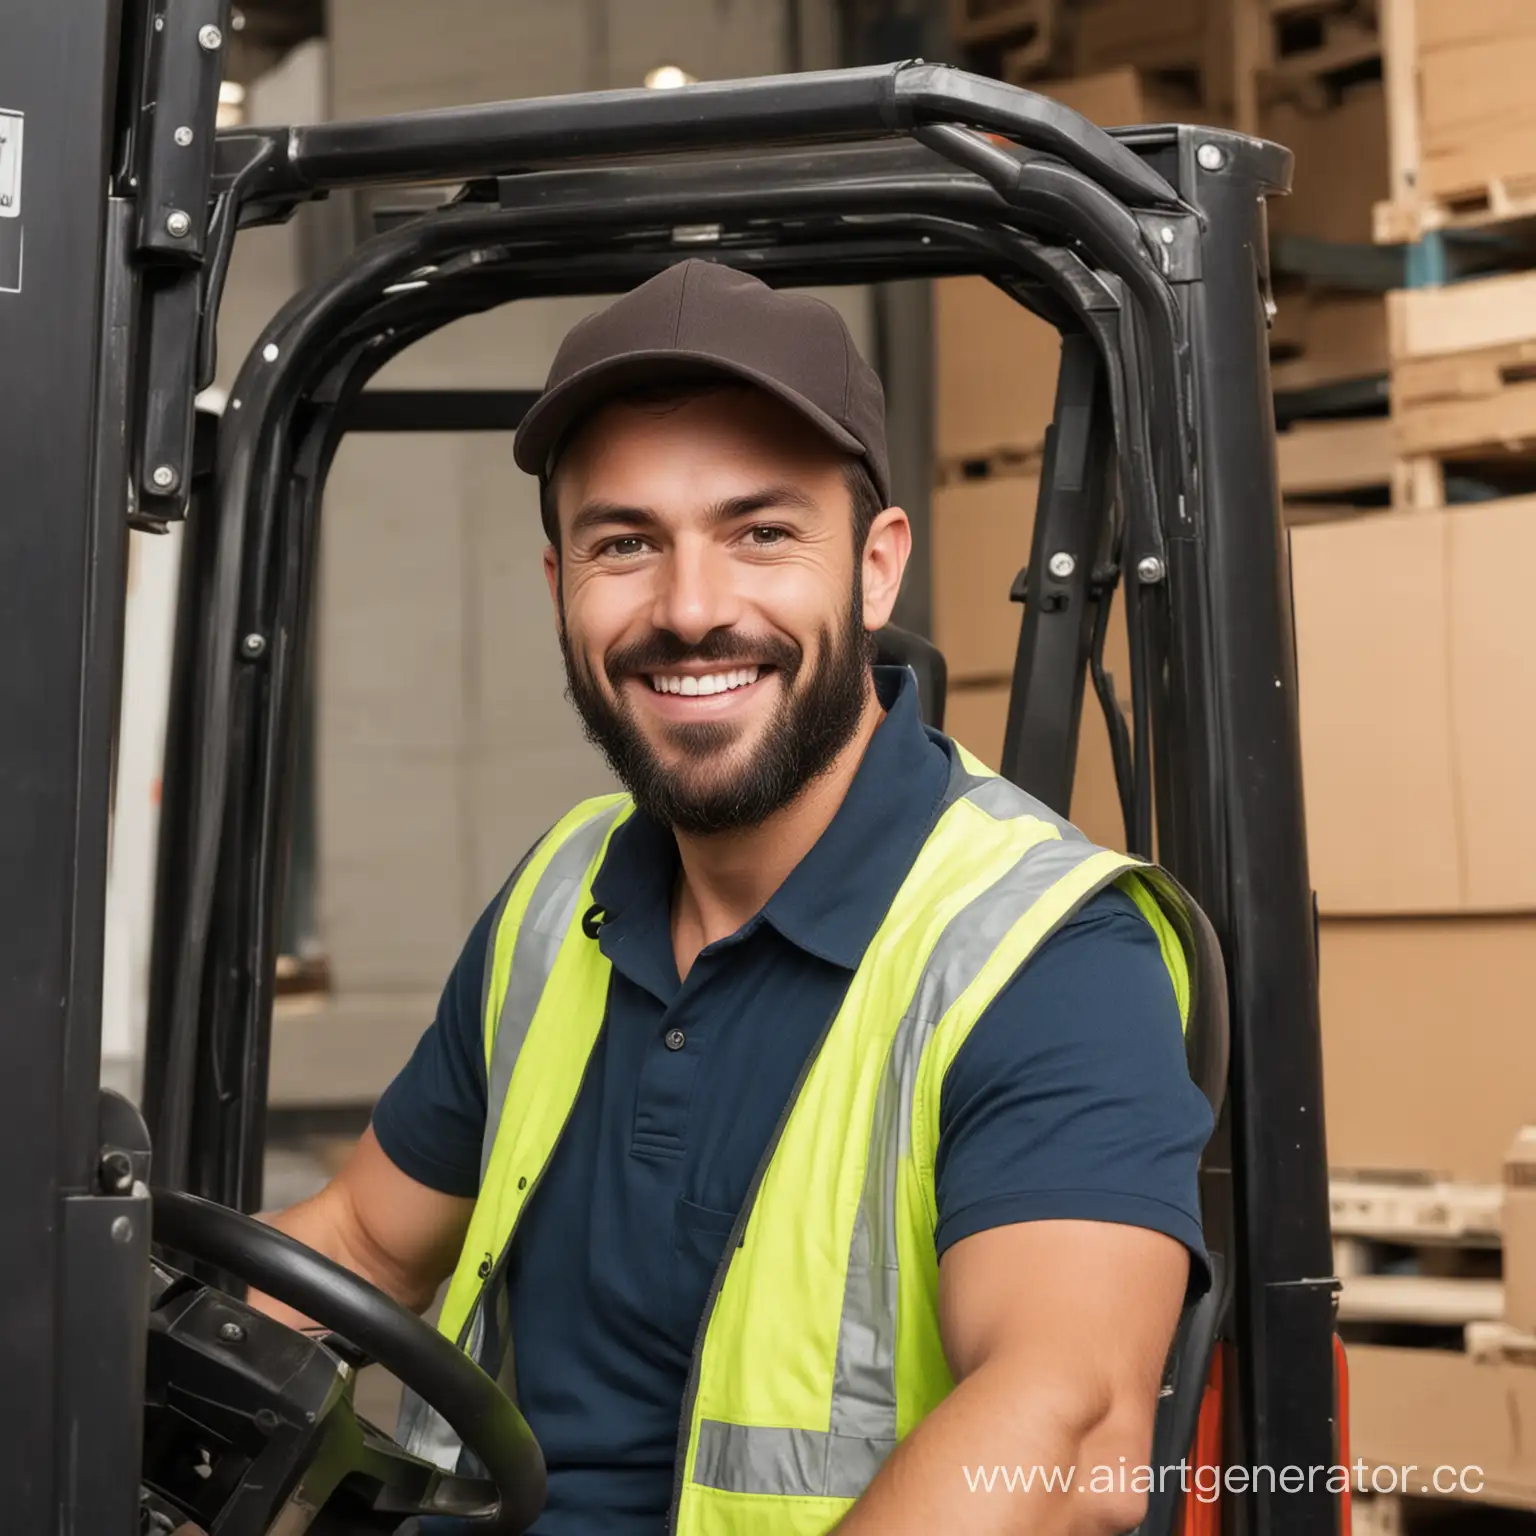 Smiling-Forklift-Driver-Poses-for-the-Camera-at-Work